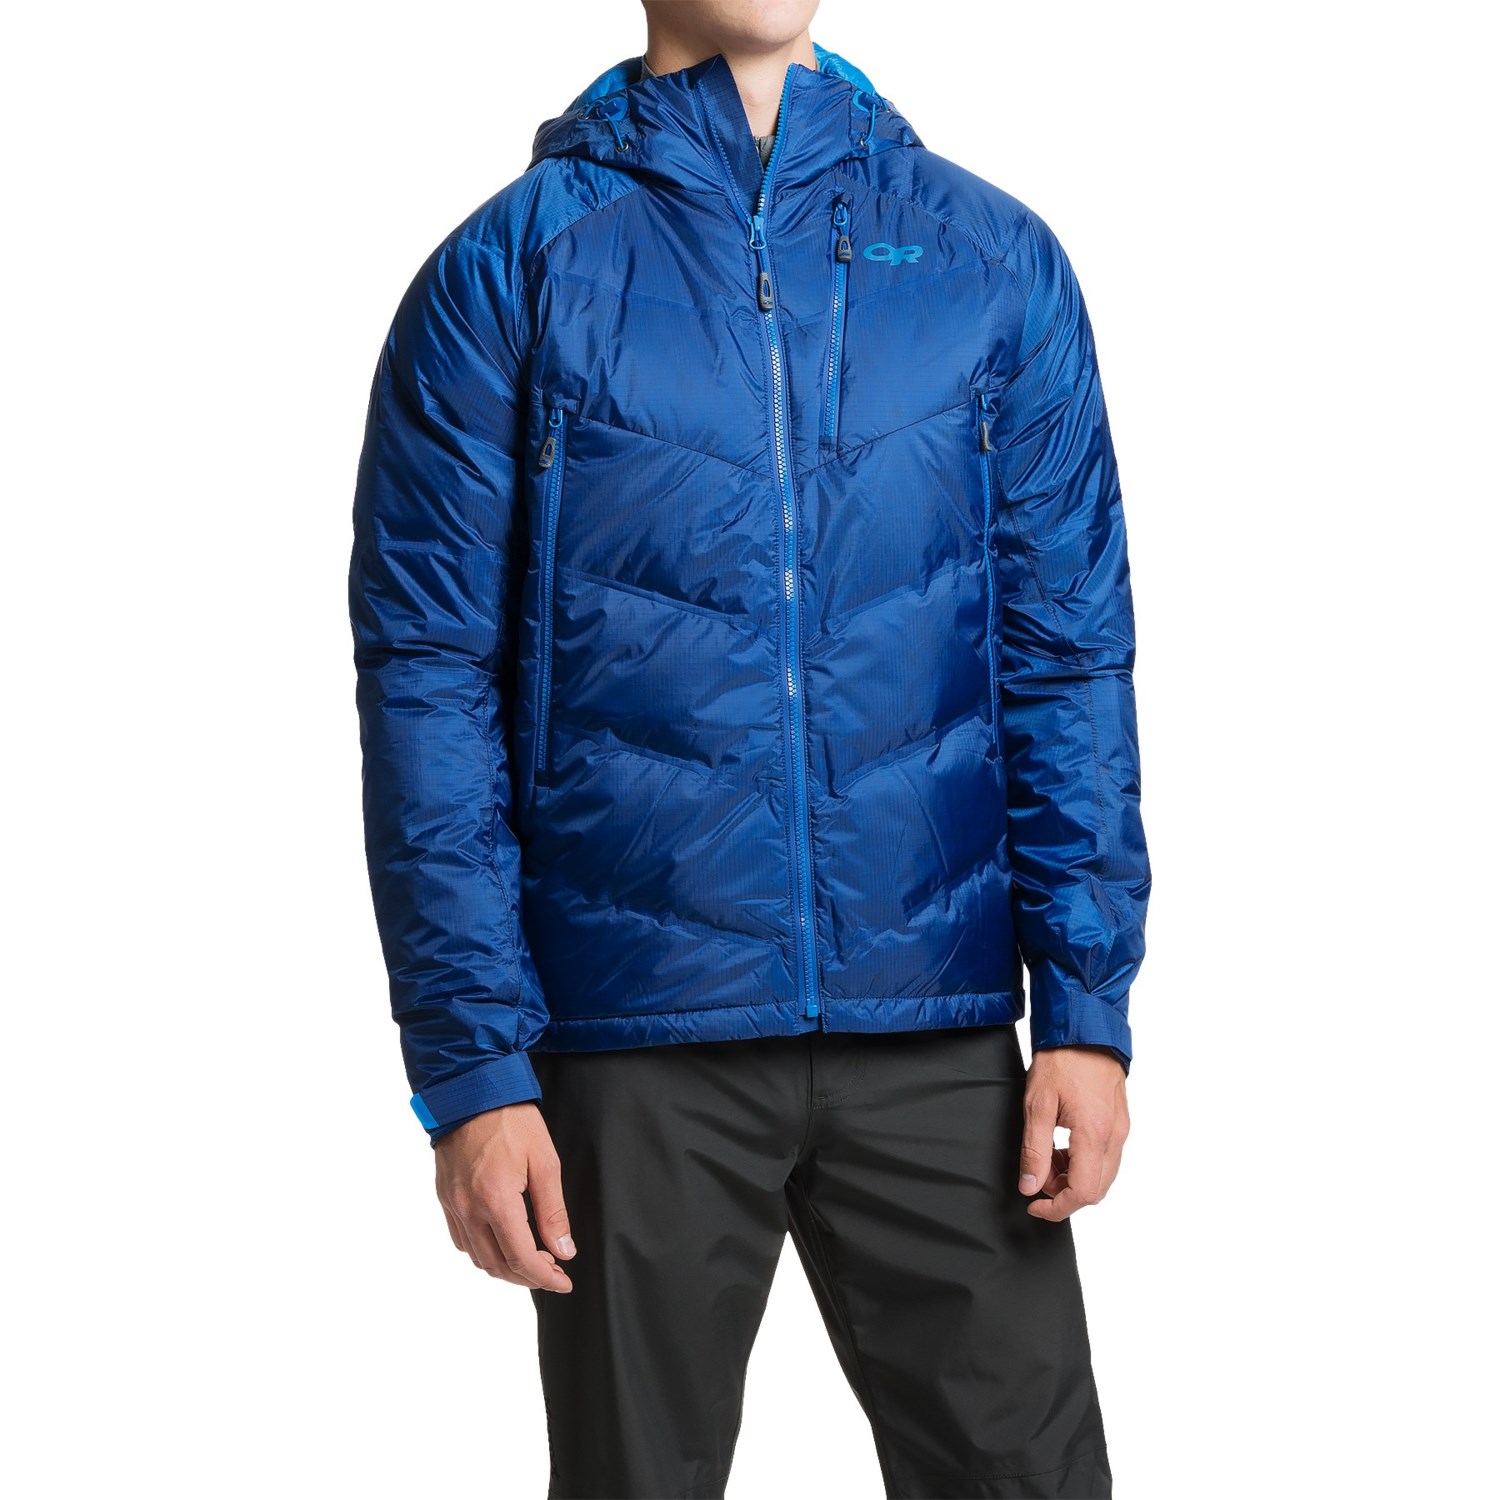 Outdoor Research Floodlight Down Jacket (For Men) 8627J - Save 85%